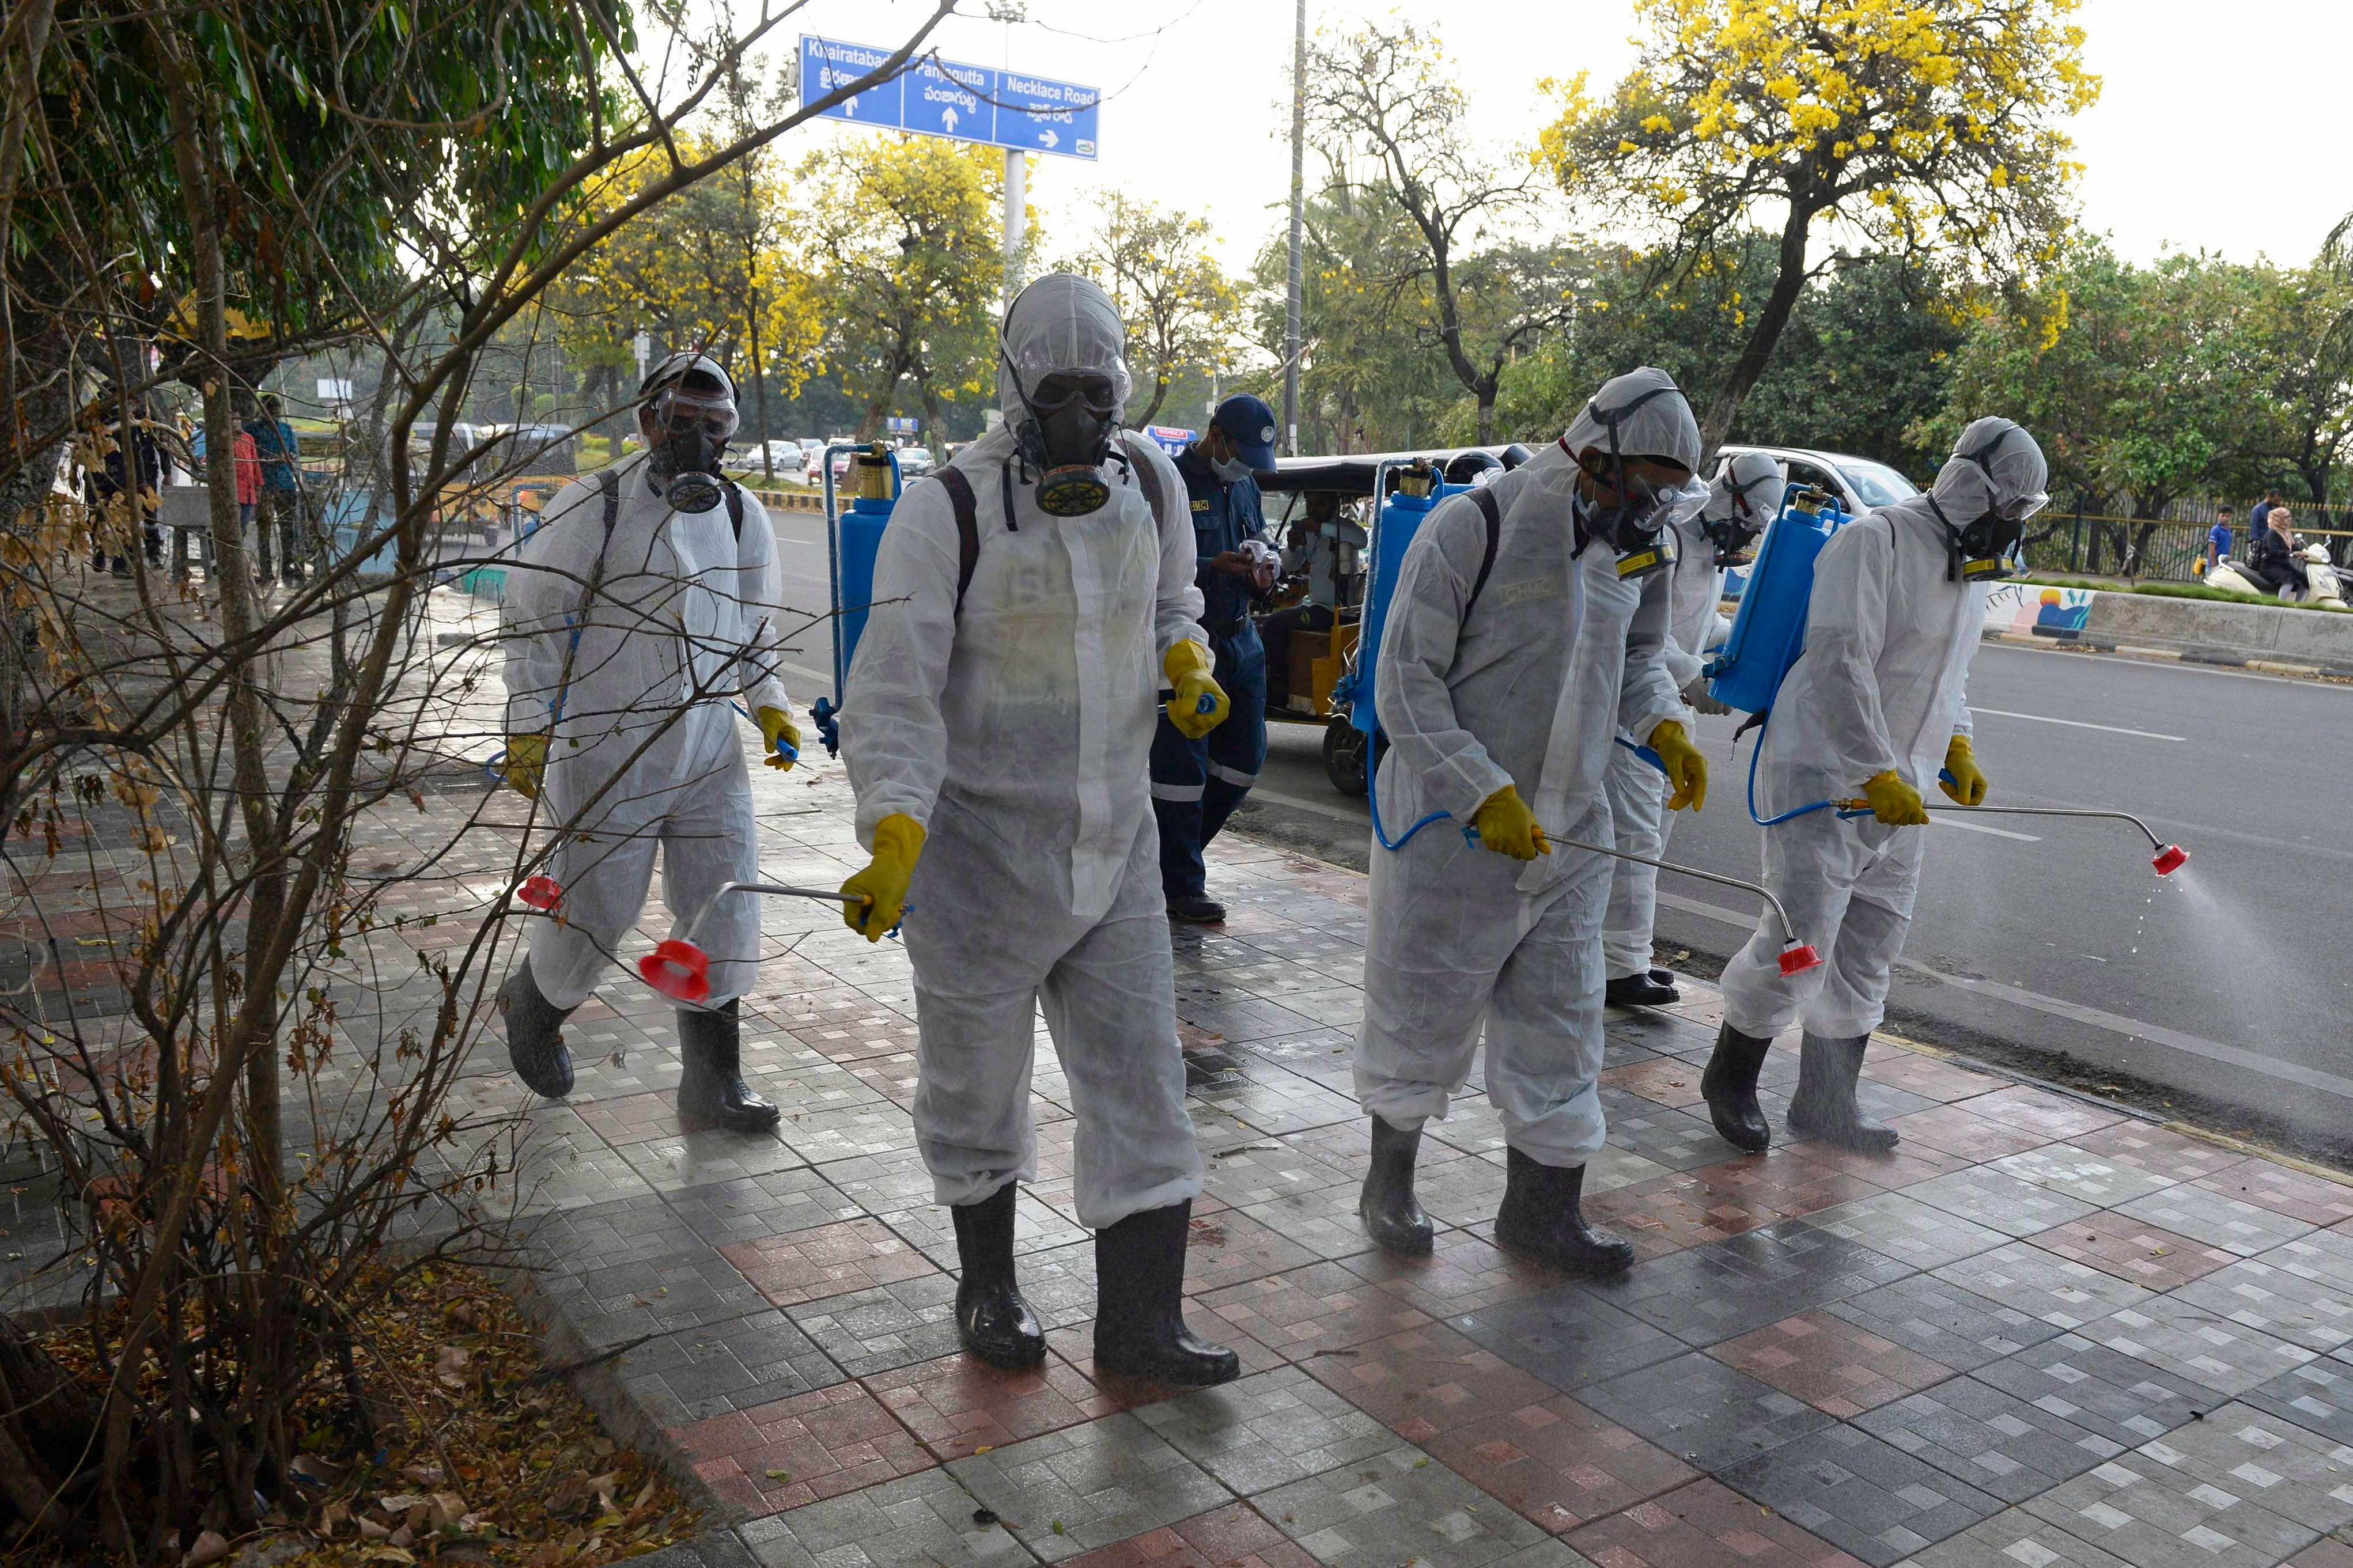 Members from Disaster Response Force (DRF) of Telangana State, wearing protective gear spray disinfectant on a pedestrian footpath amid concerns over the spread of the COVID-19 novel coronavirus. (AFP Photo)